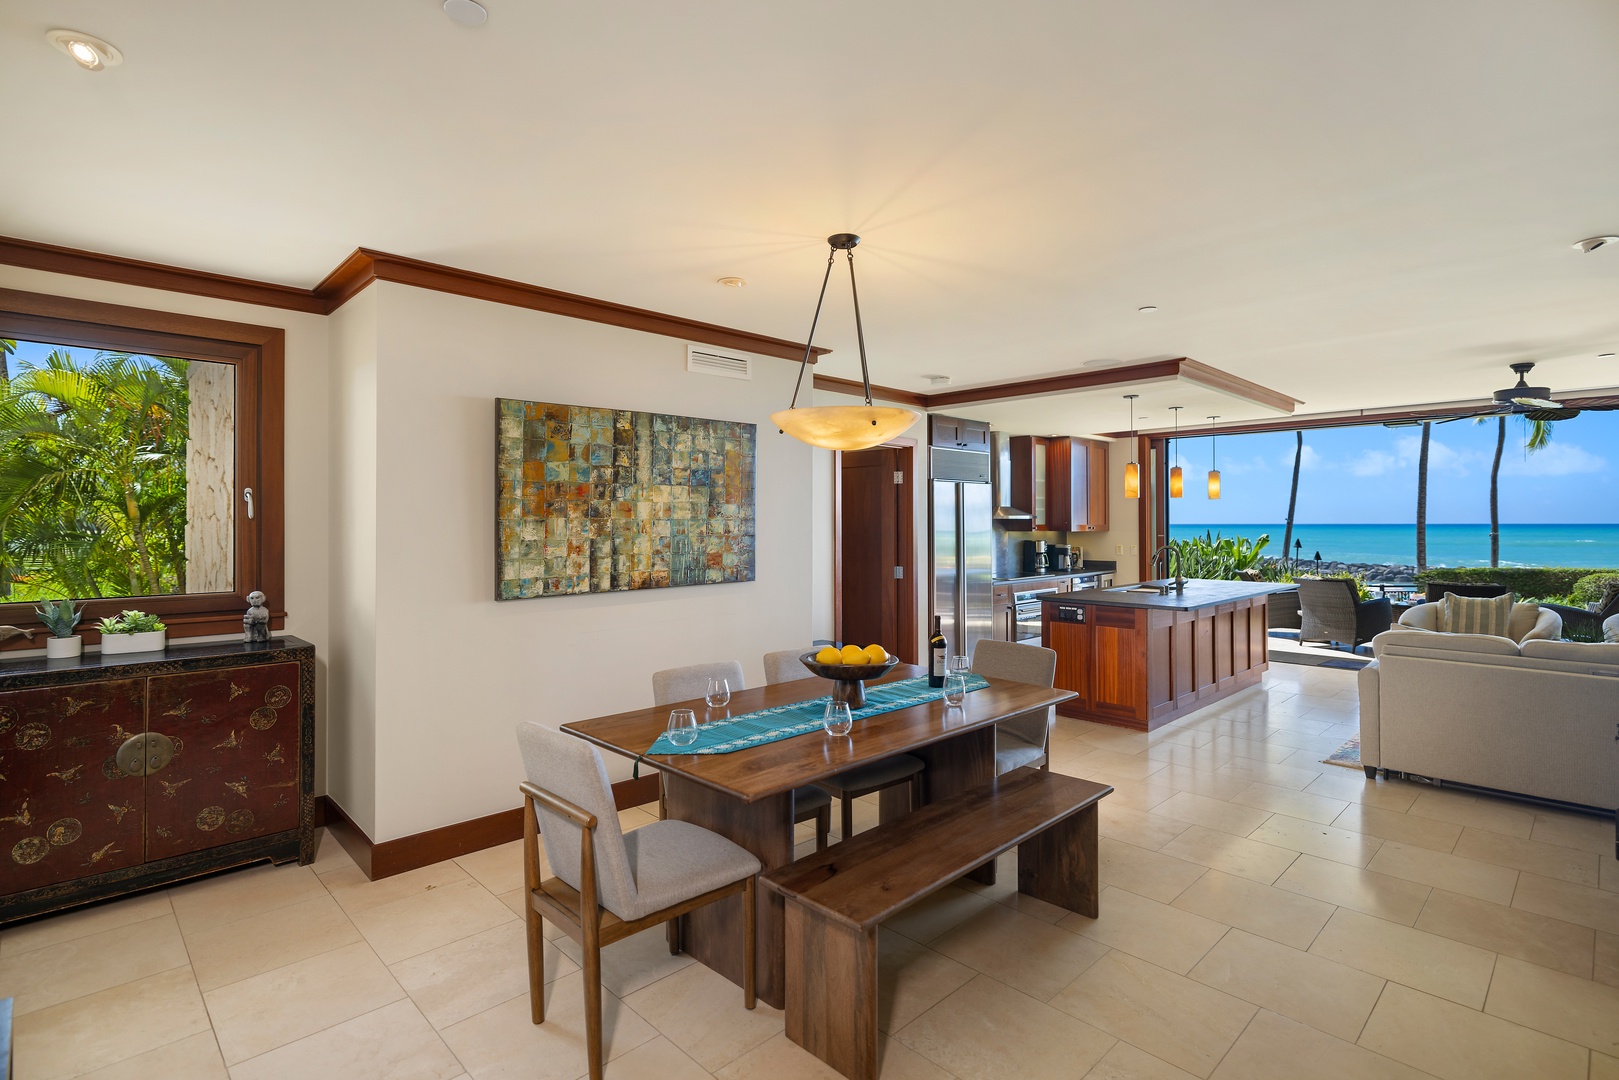 Kapolei Vacation Rentals, Ko Olina Beach Villas B109 - 3.A spacious and airy living area with a dining table and lounge, opening up to ocean views.